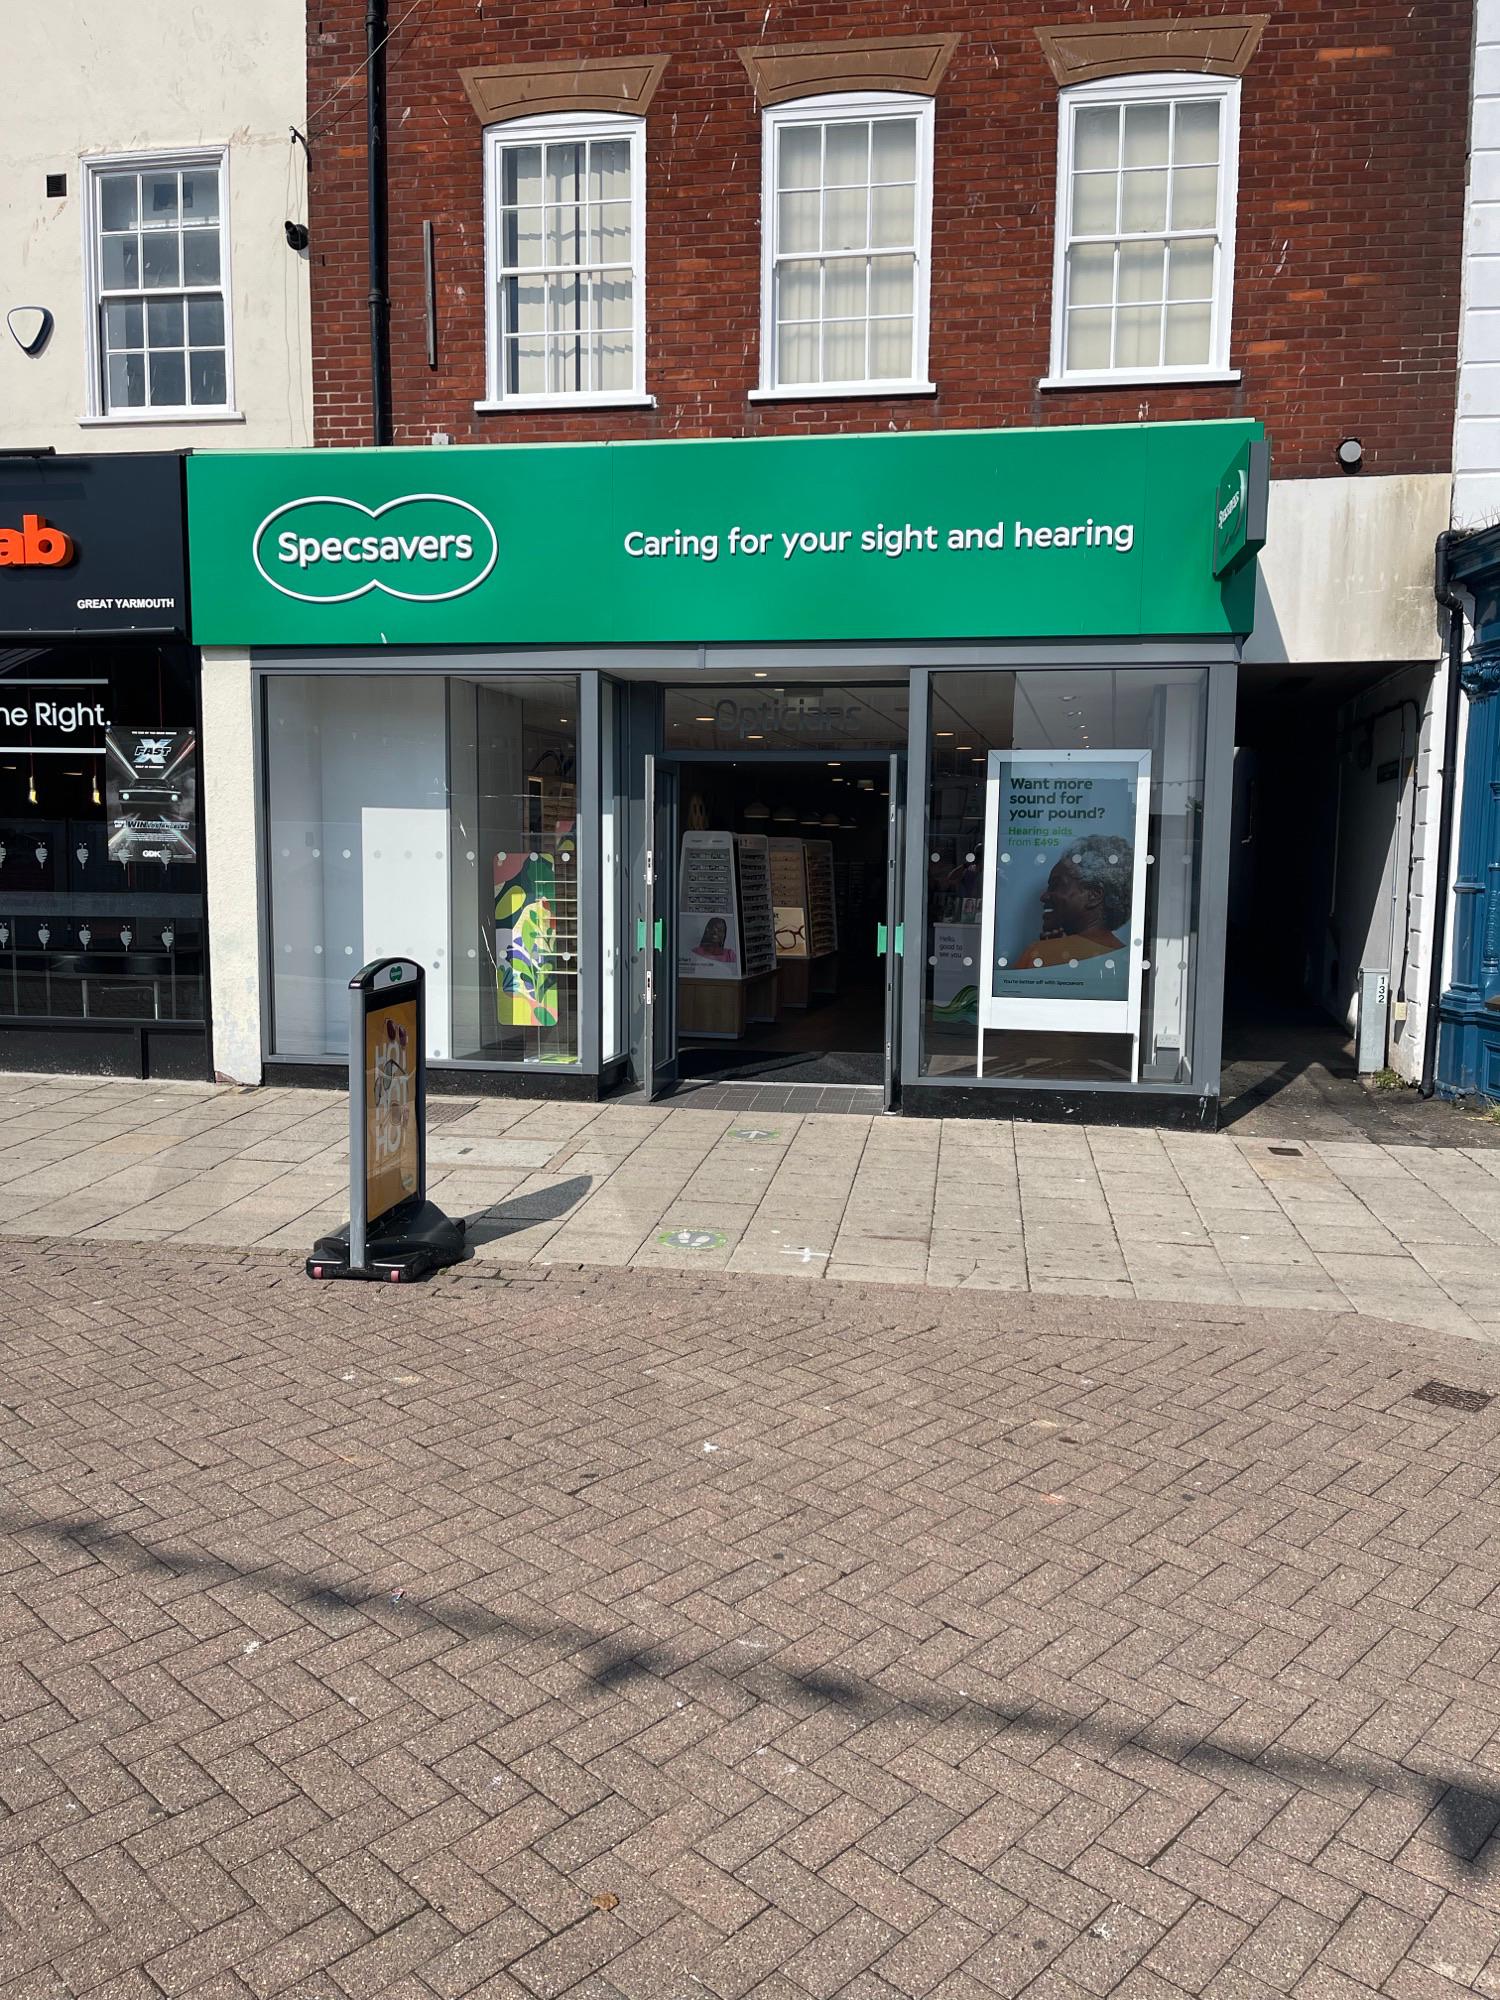 Images Specsavers Opticians and Audiologists - Great Yarmouth